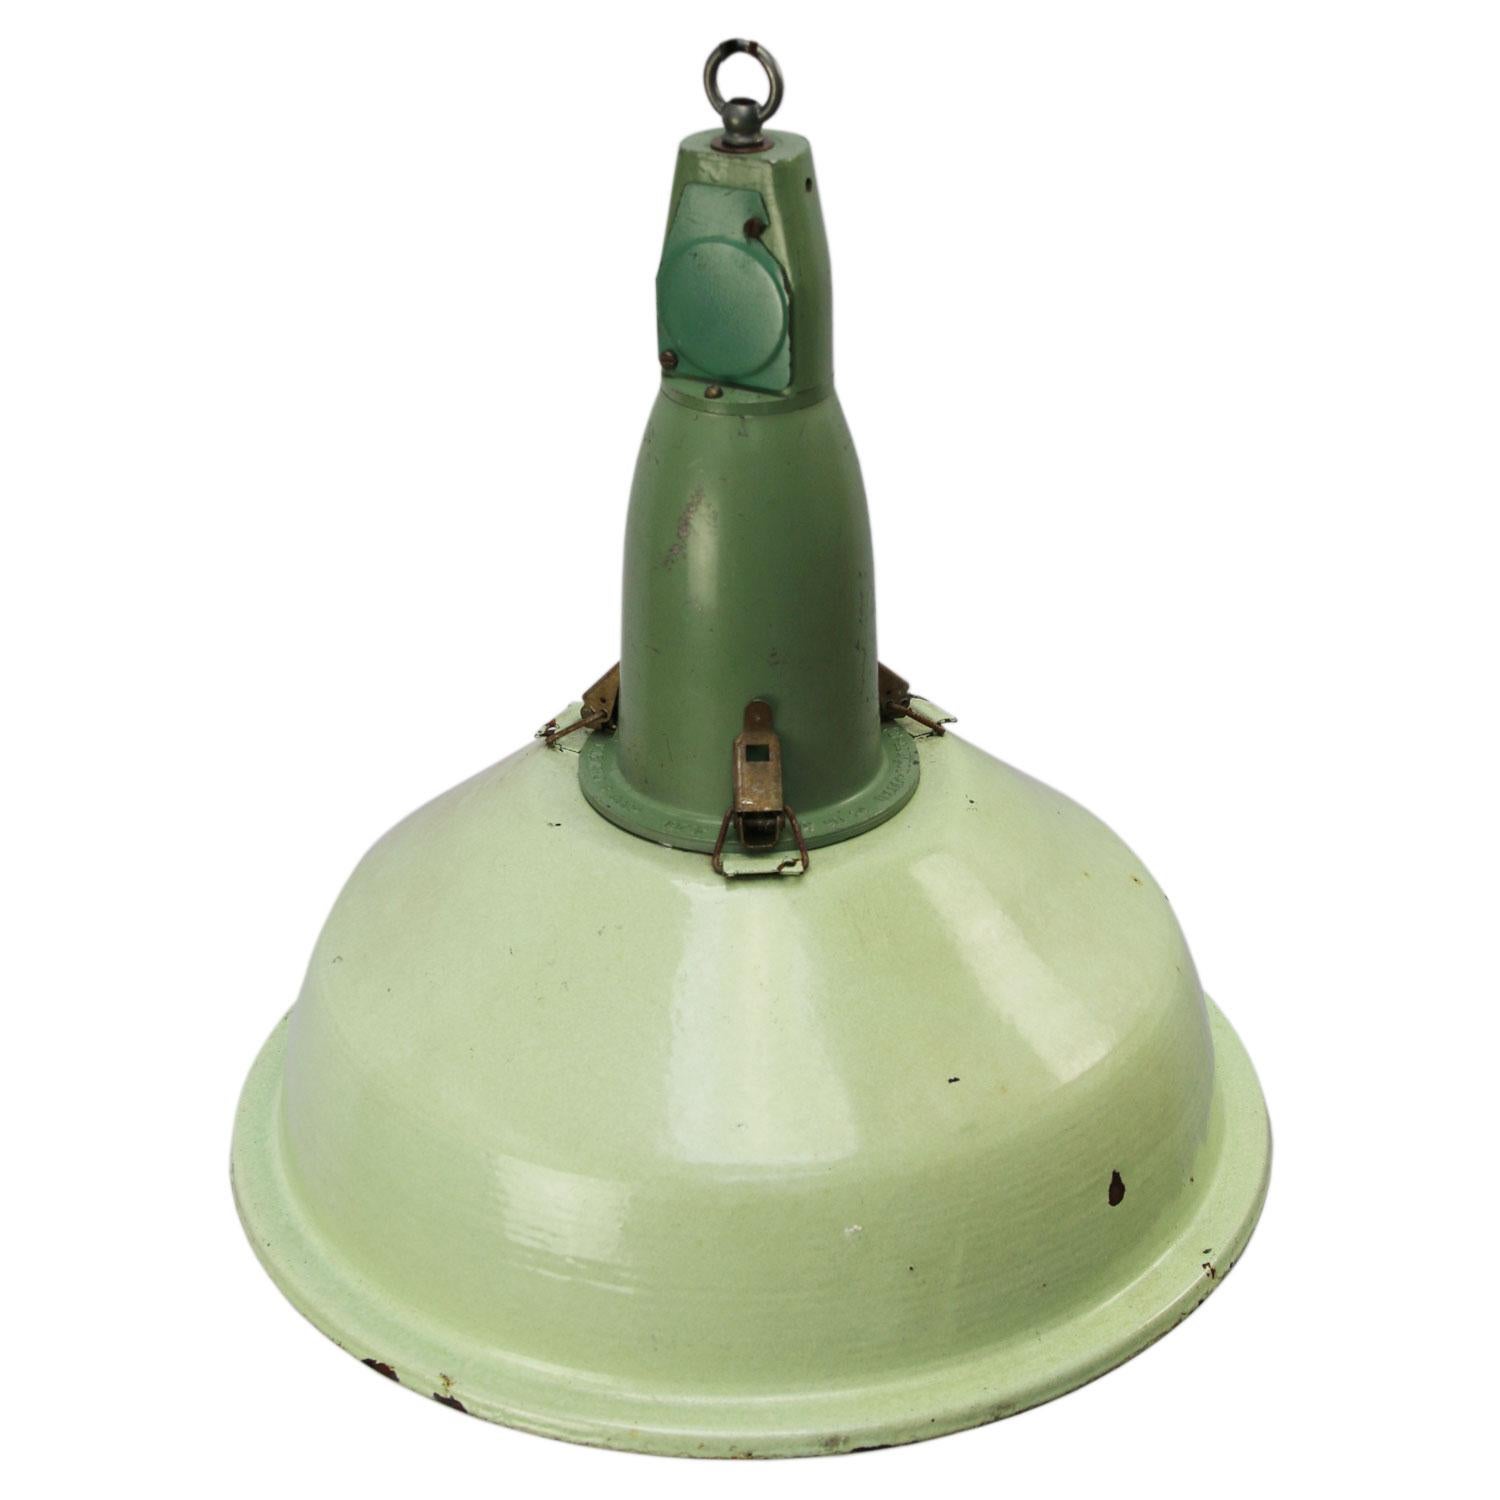 Enamel Industrial pendant
Light green enamel shade, white inside.
Green cast aluminum top.

Weight: 2.70 kg / 6 lb

Priced per individual item. All lamps have been made suitable by international standards for incandescent light bulbs,